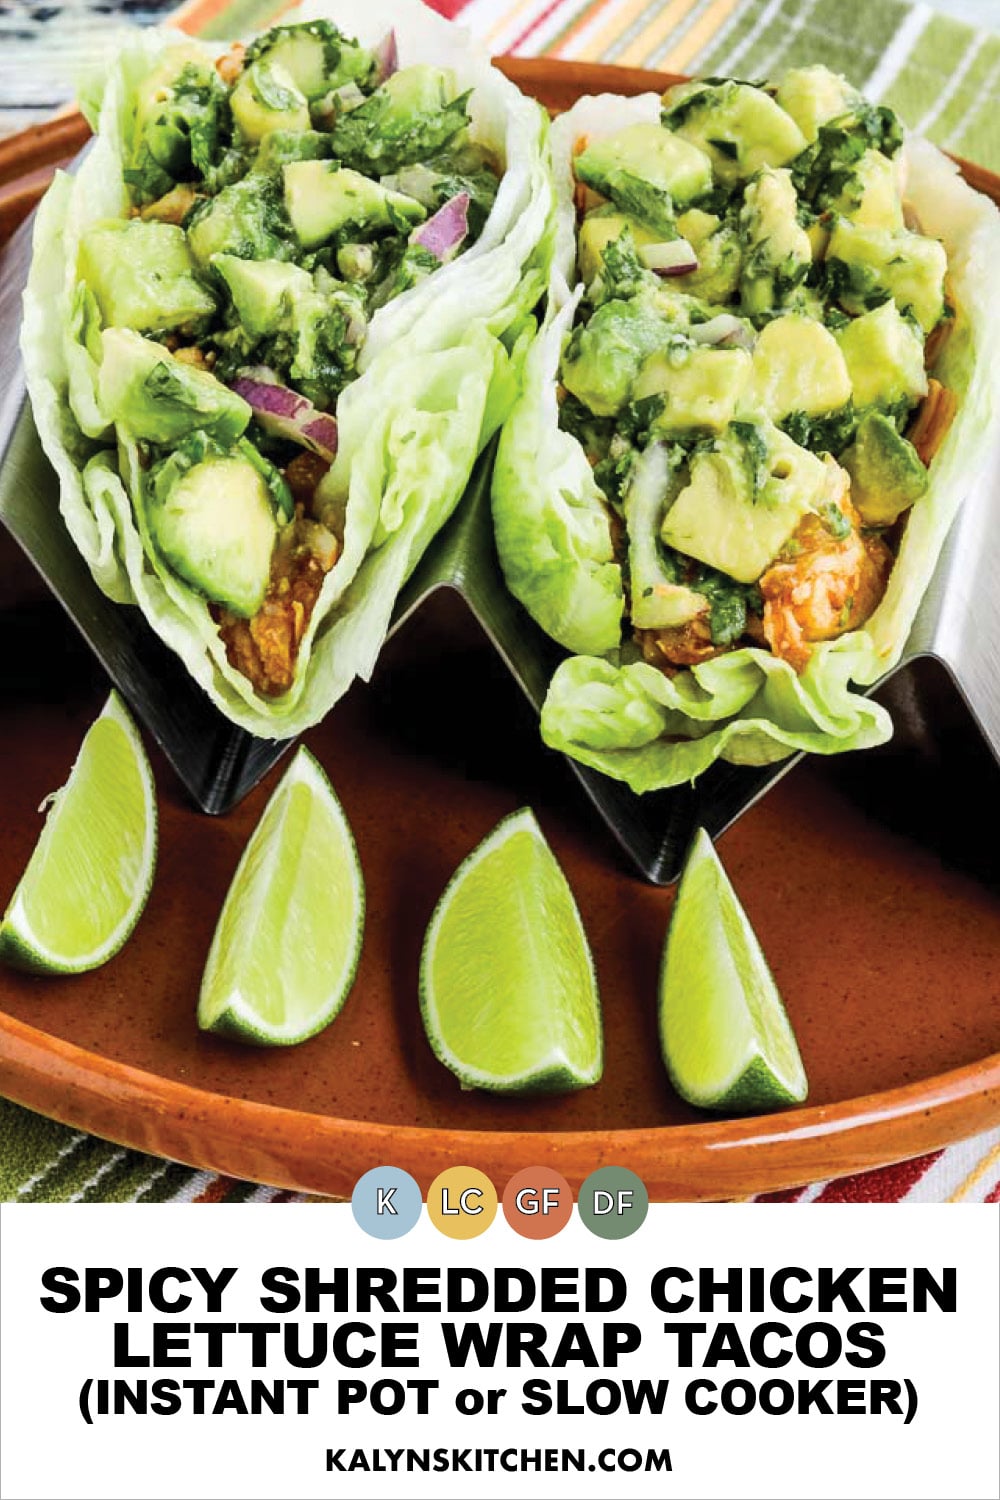 Pinterest image of Spicy Shredded Chicken Lettuce Wrap Tacos